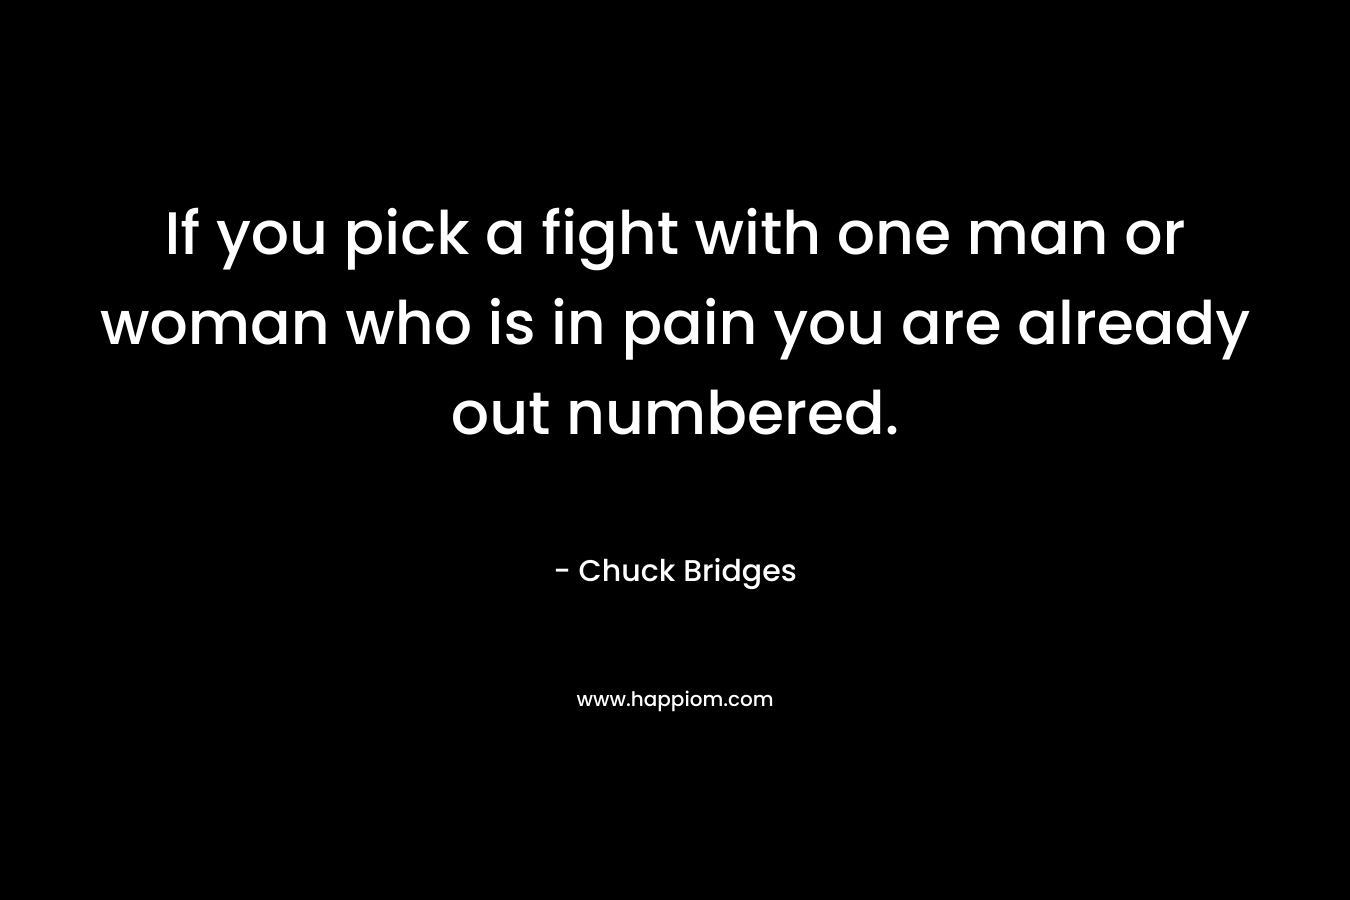 If you pick a fight with one man or woman who is in pain you are already out numbered.